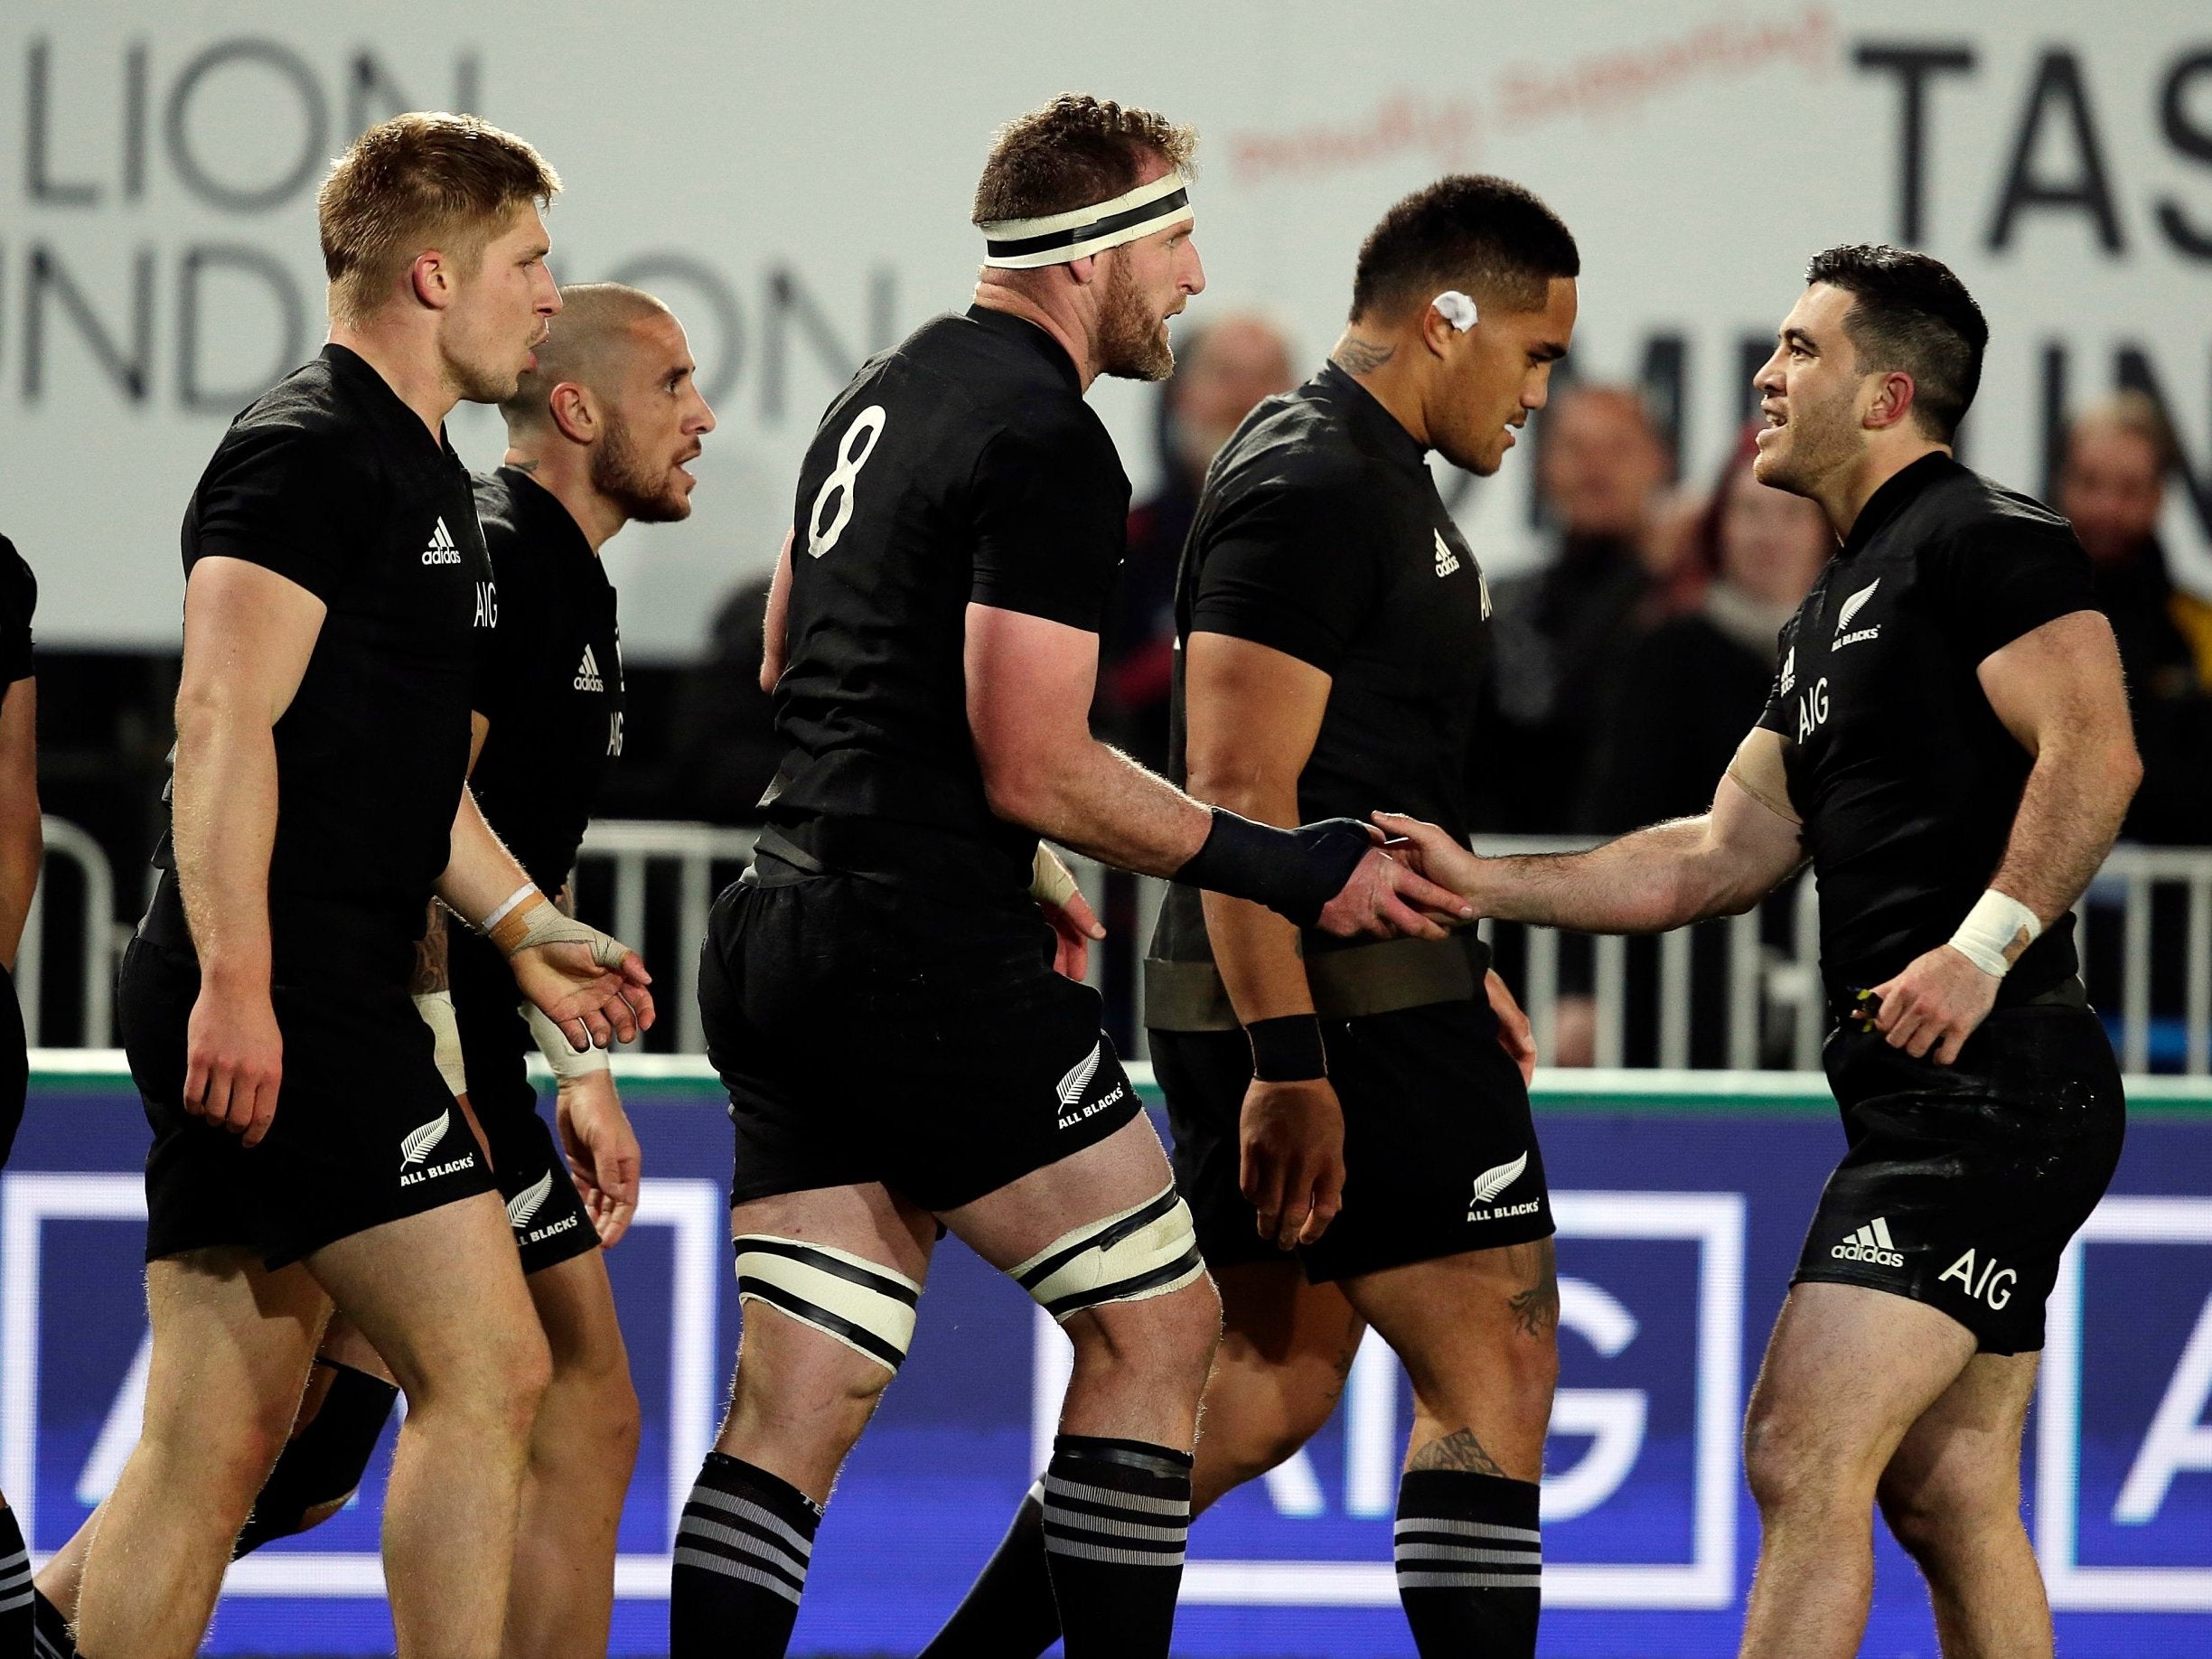 Kieran Read celebrates after scoring a try for the All Blacks